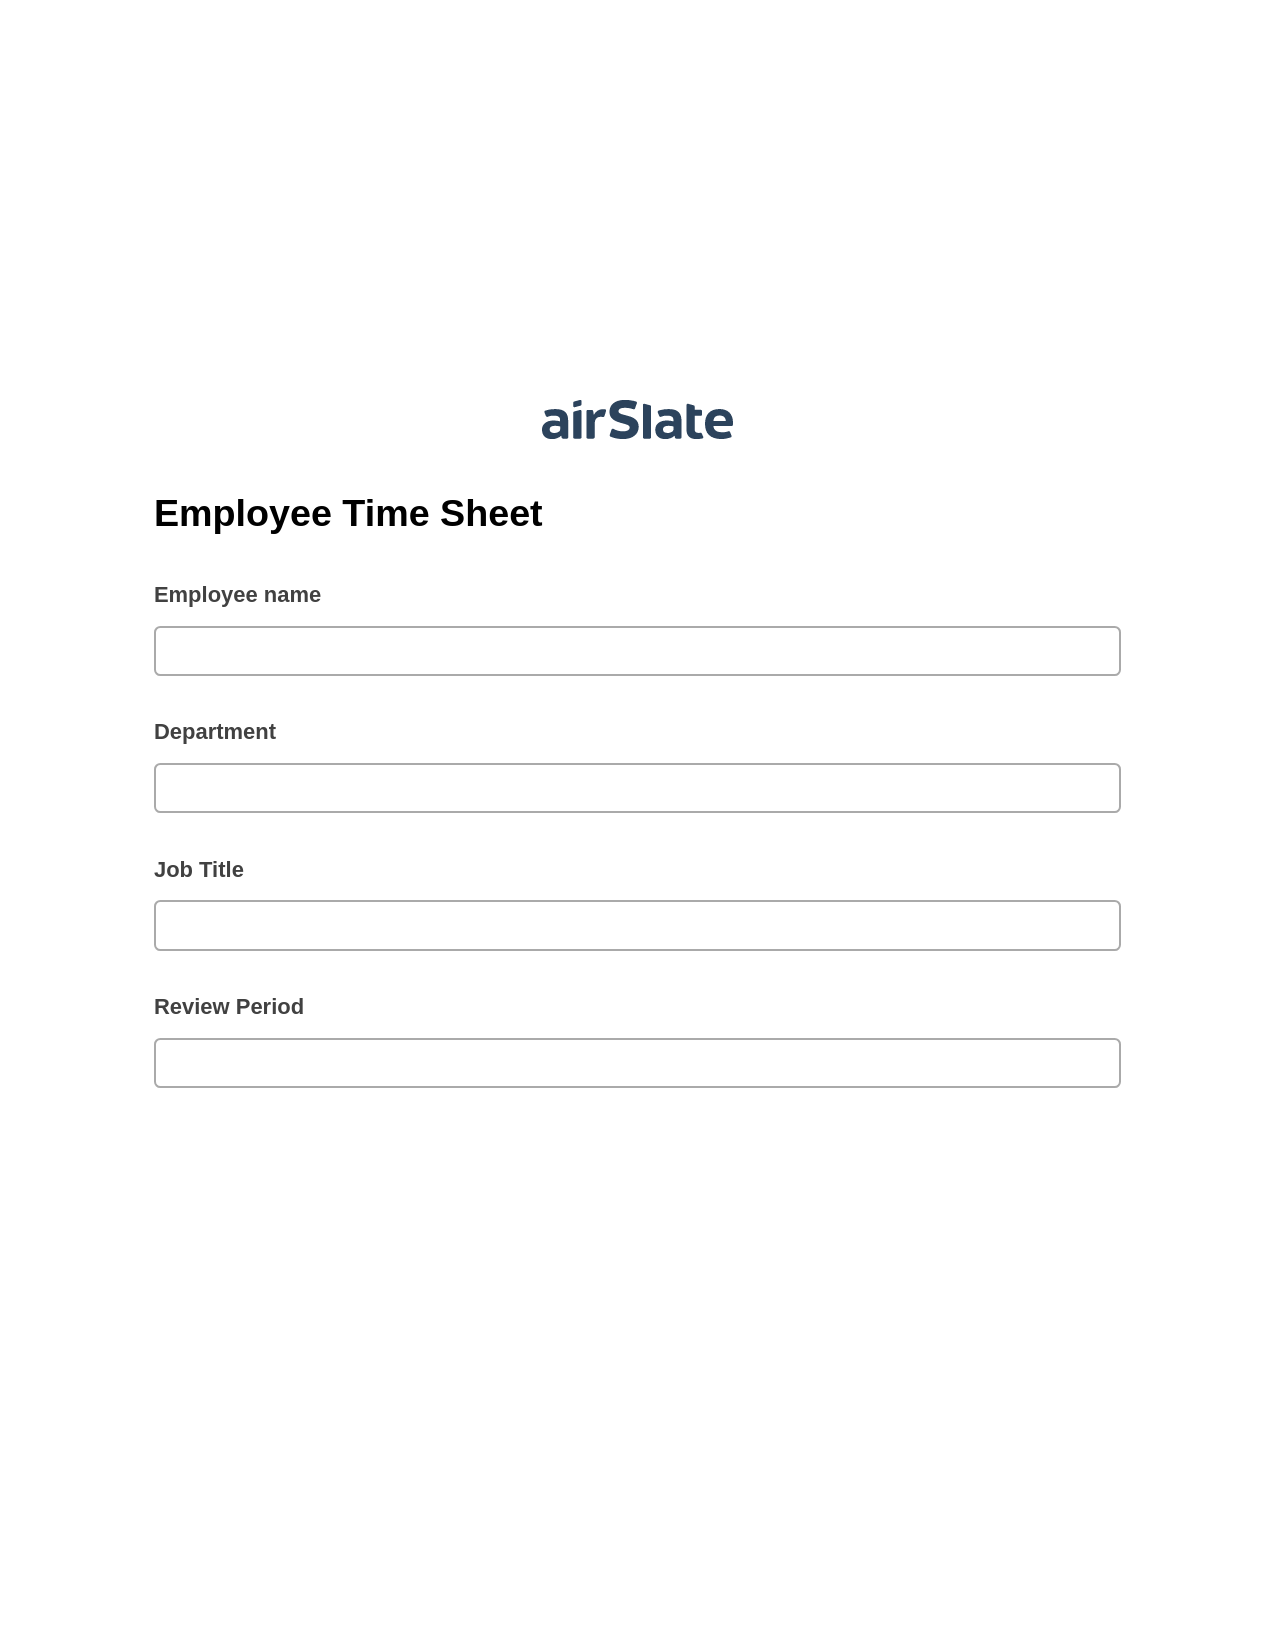 Employee Time Sheet Pre-fill from Salesforce Records Bot, Slack Notification Bot, Archive to OneDrive Bot